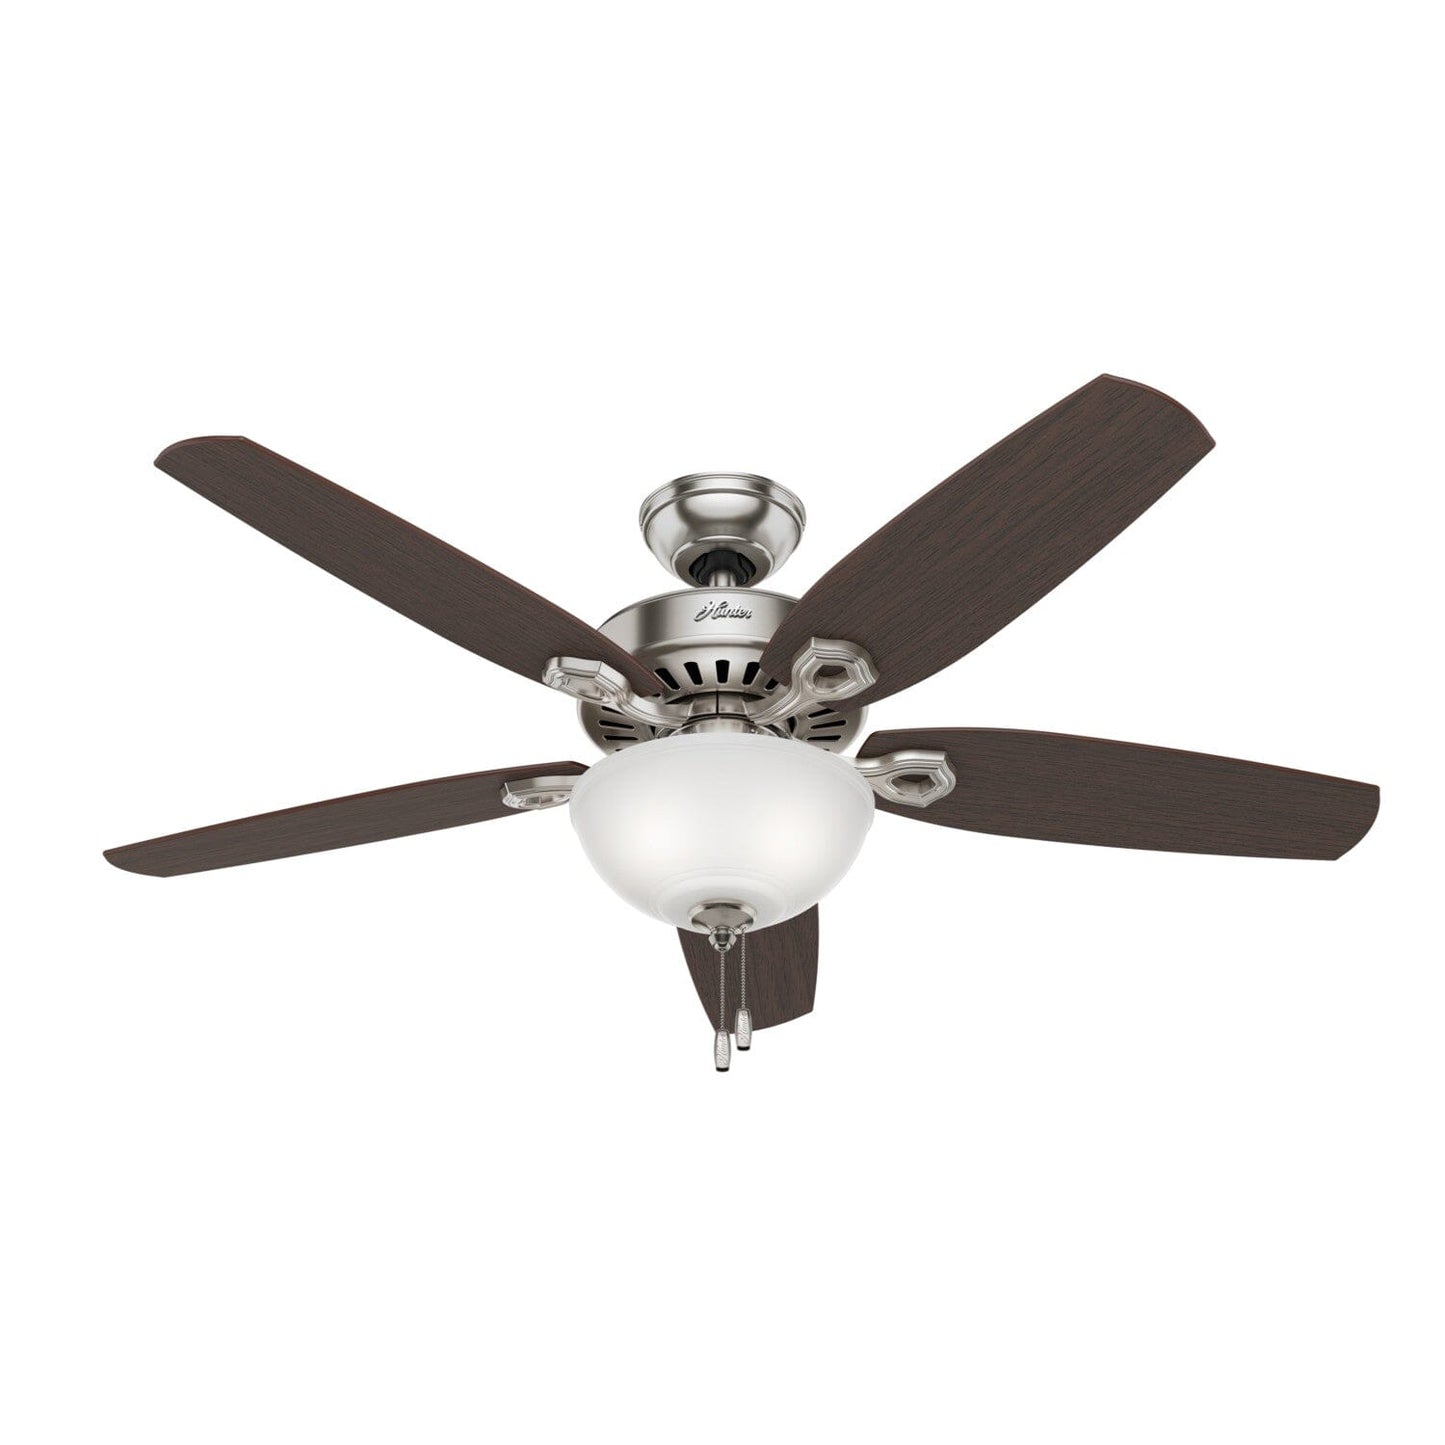 Builder Deluxe with Light 52 inch Ceiling Fans Hunter Brushed Nickel - Brazilian Cherry 